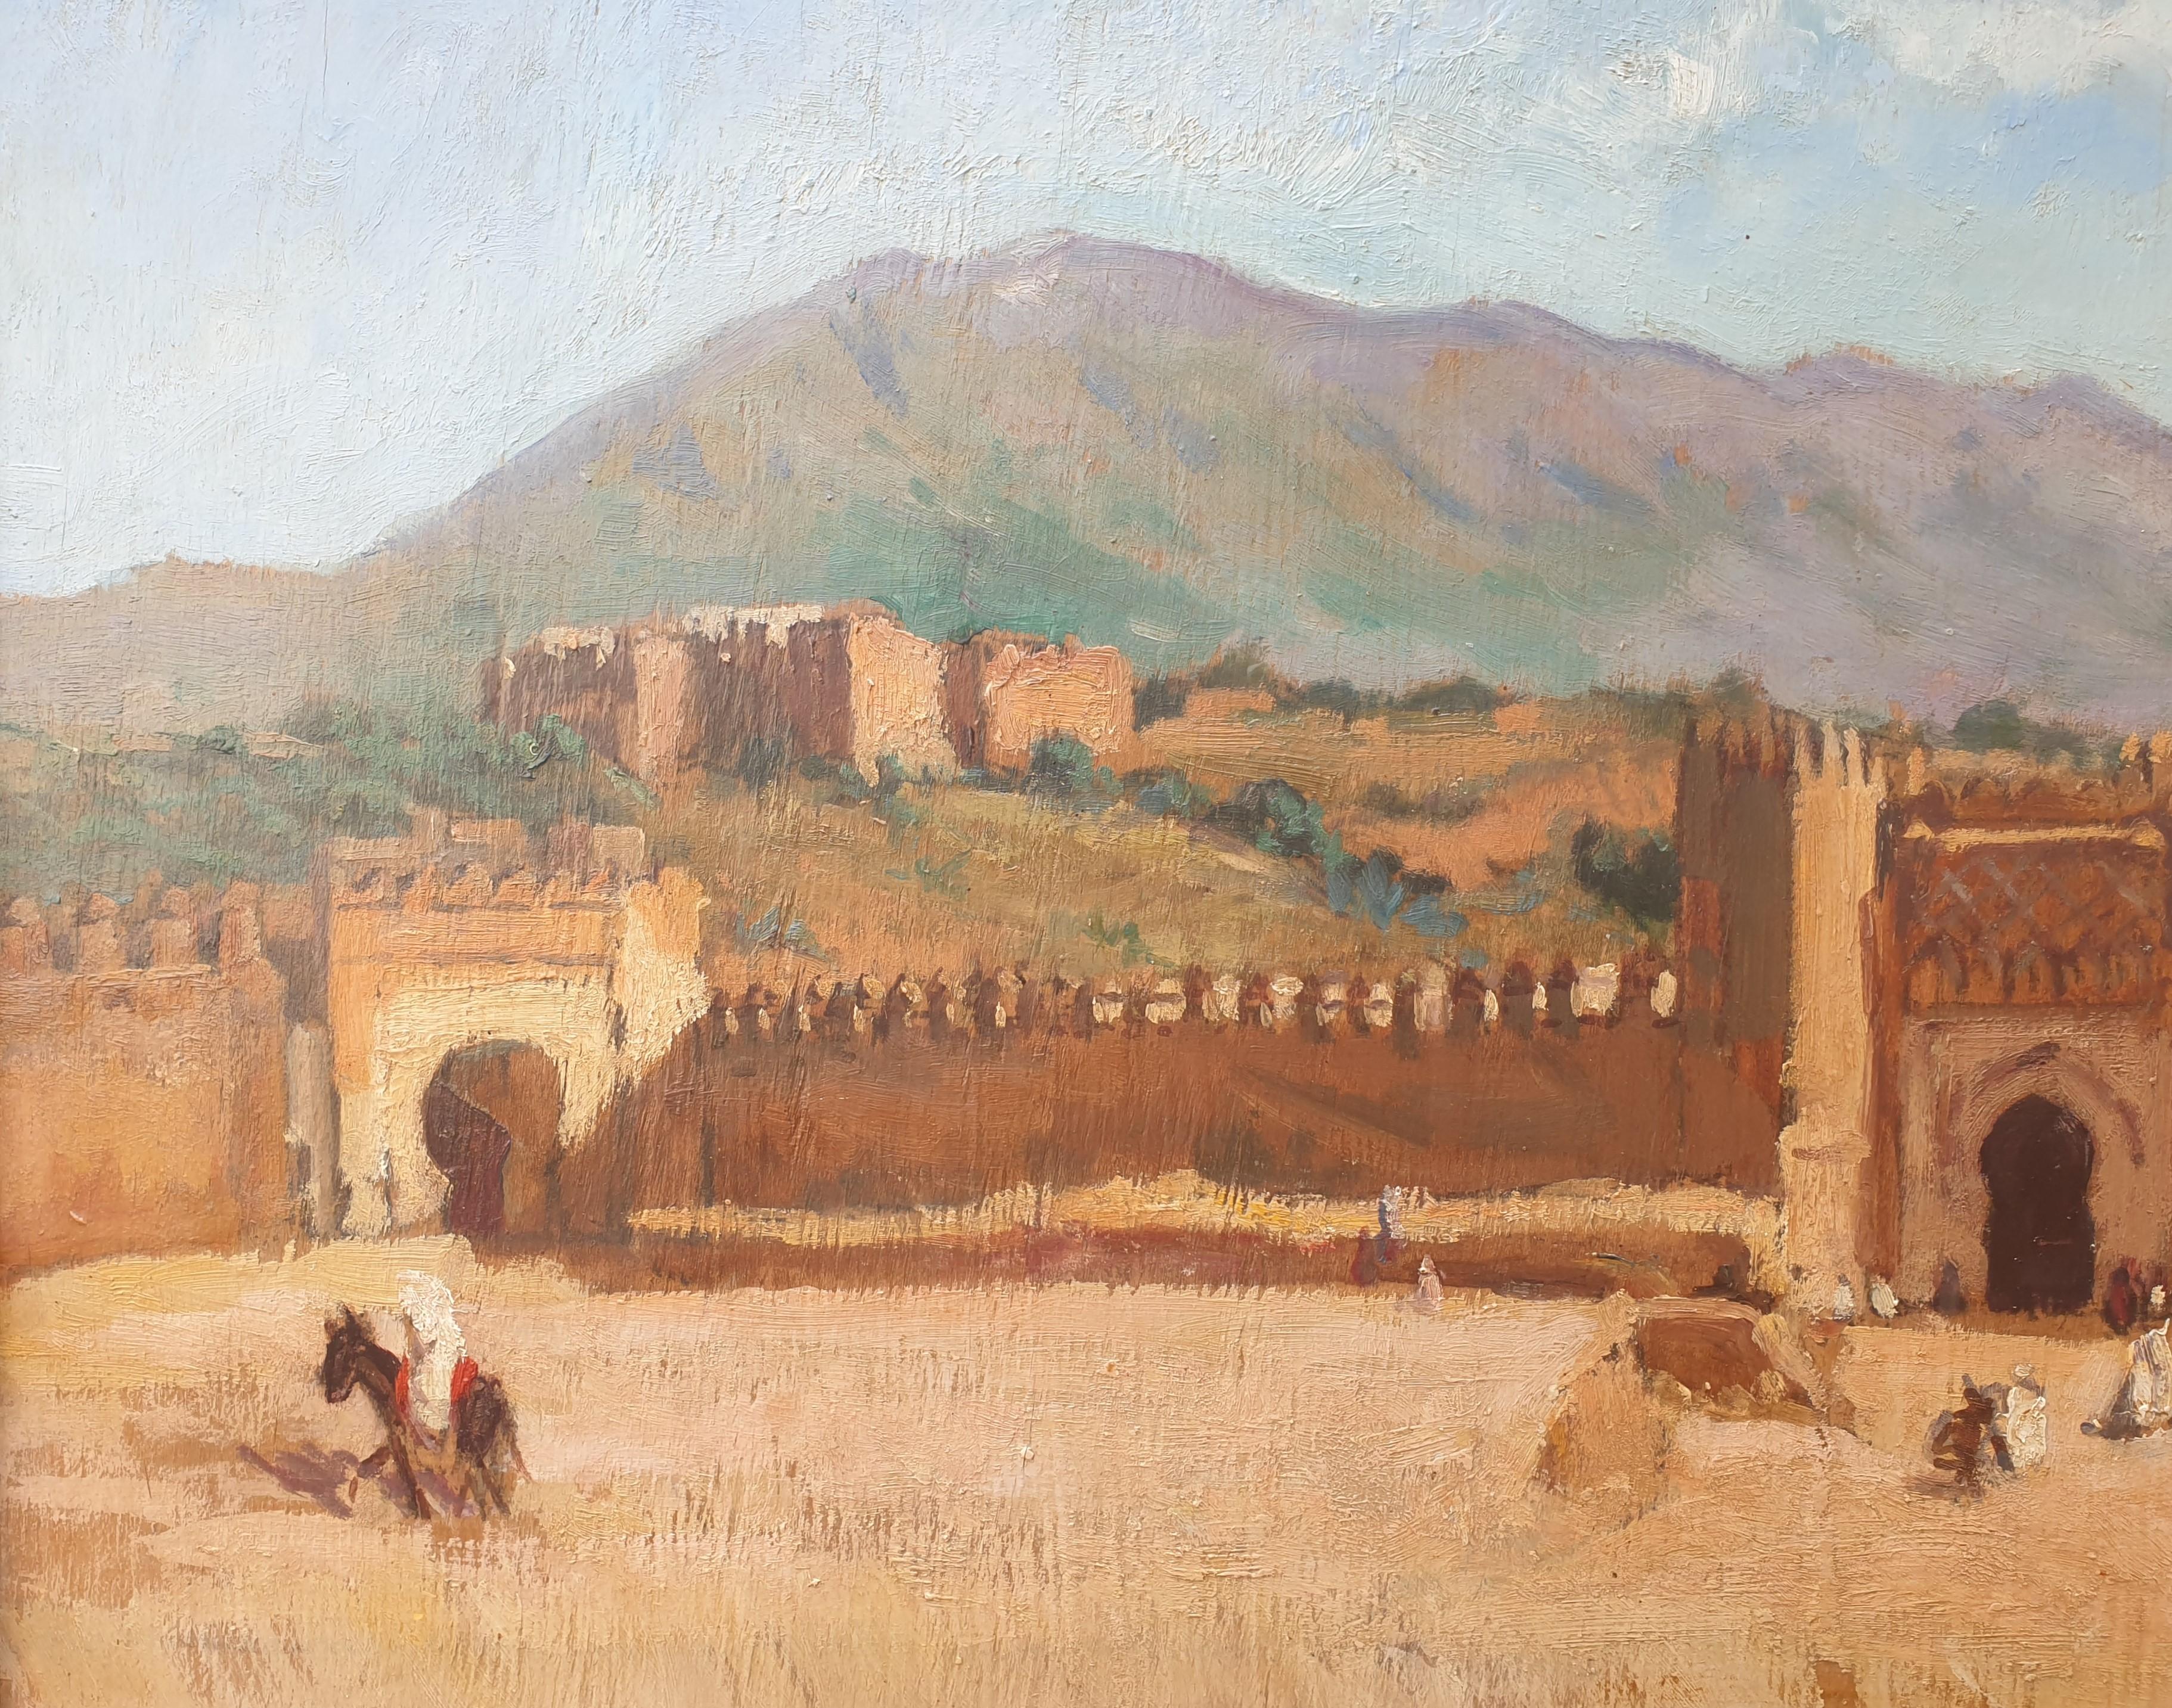 Painting orientalist REY with PONTOY Marocco Fez Boujloud square Bab Gate  1